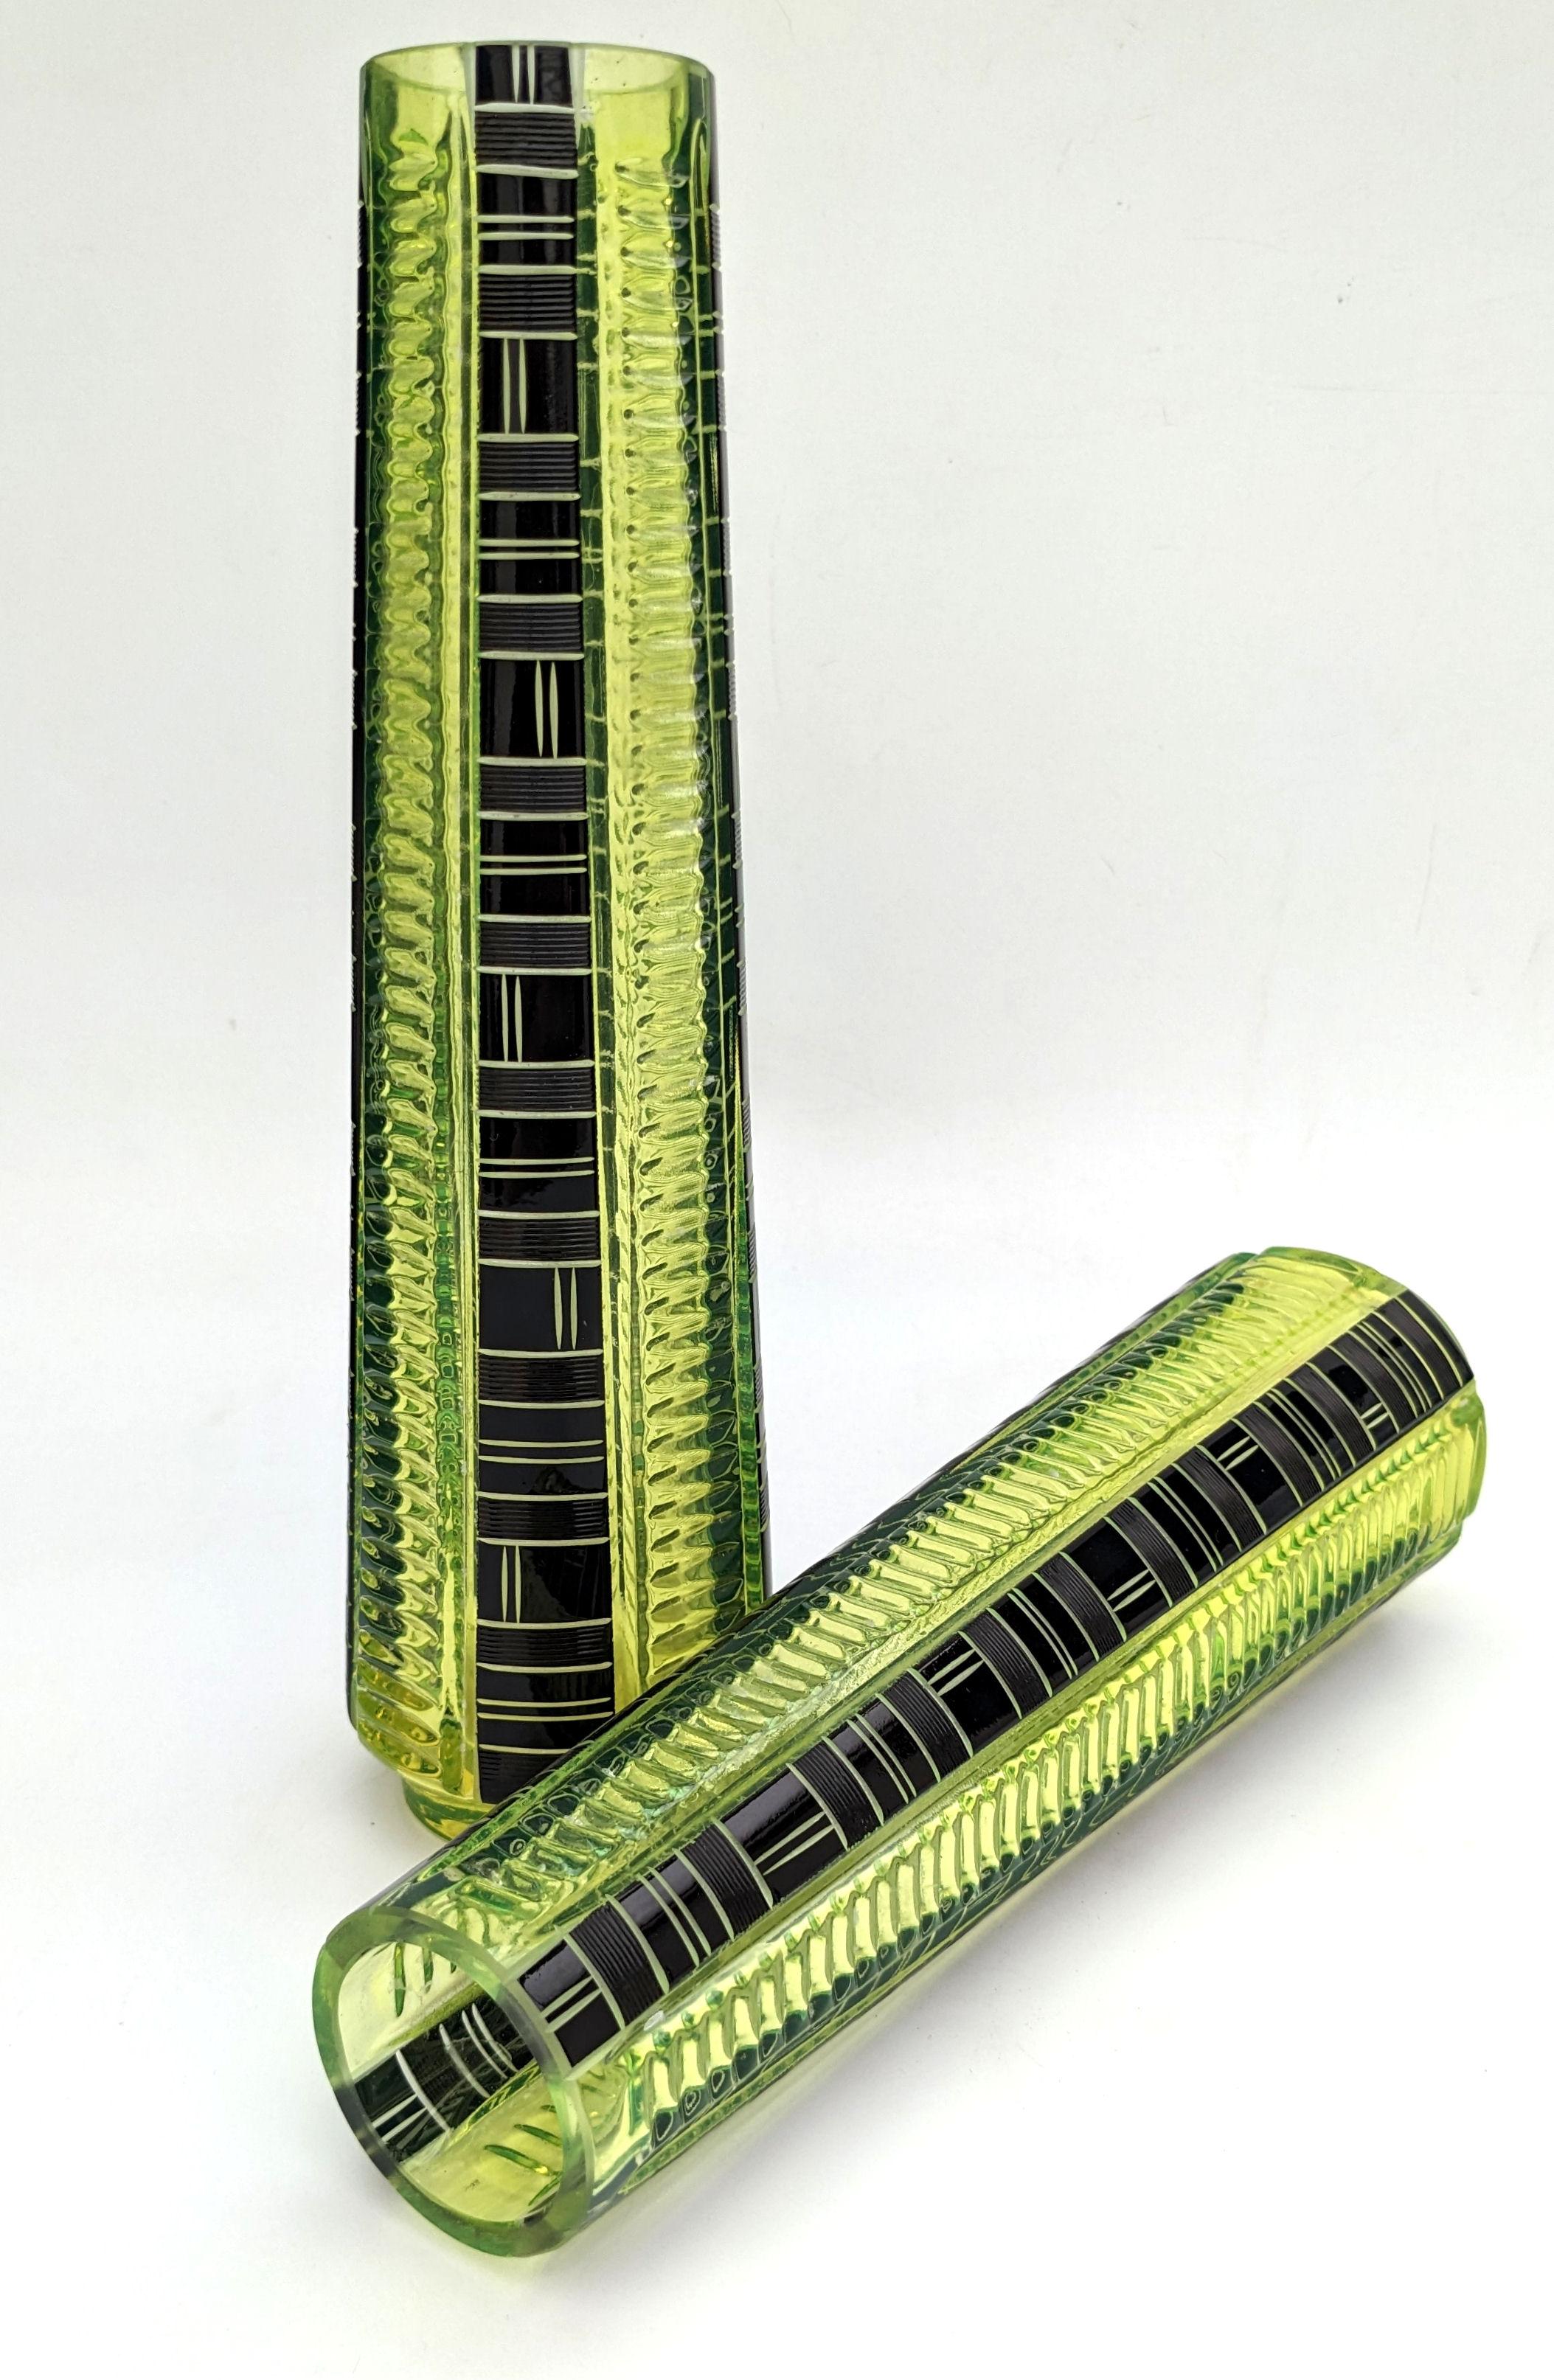 Art Deco Pair Of Tall Uranium Glass Vases By Karl Palda, c1930 In Good Condition For Sale In Devon, England